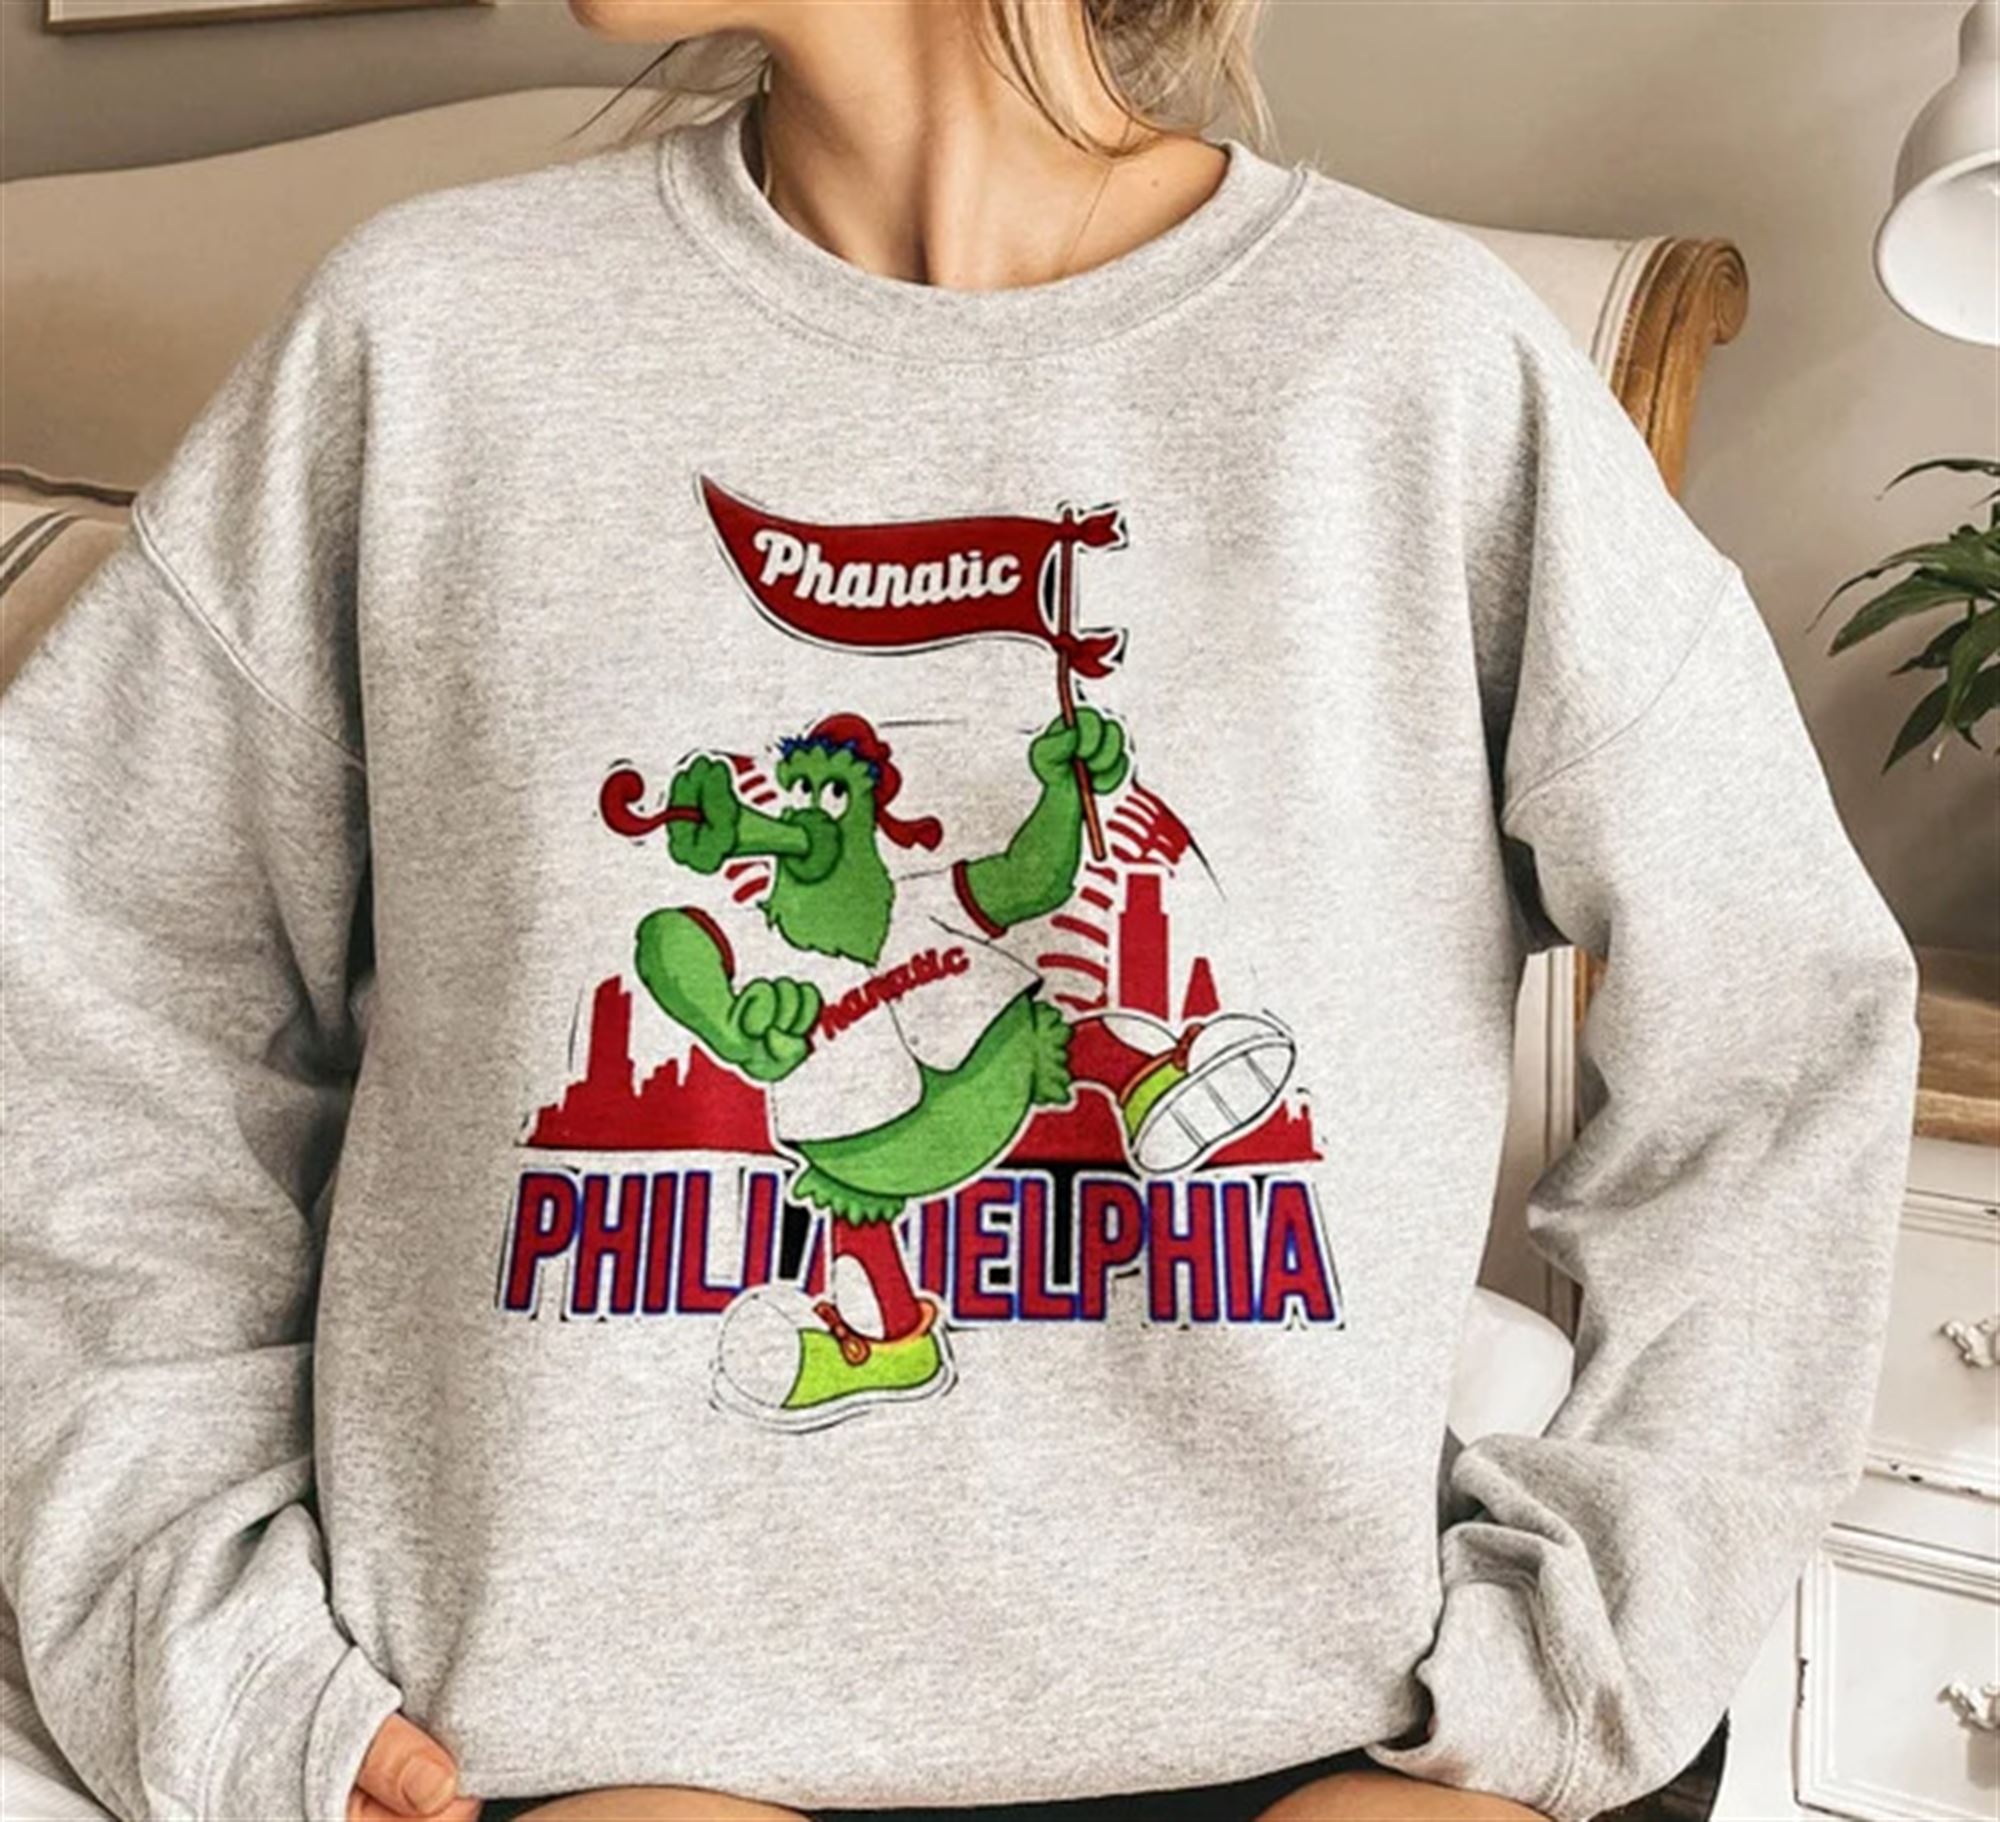 Lets Go Phillies Sweatshirtdancing On My Own Philliesred October 2022 Sweater Full Size Up To 5xl